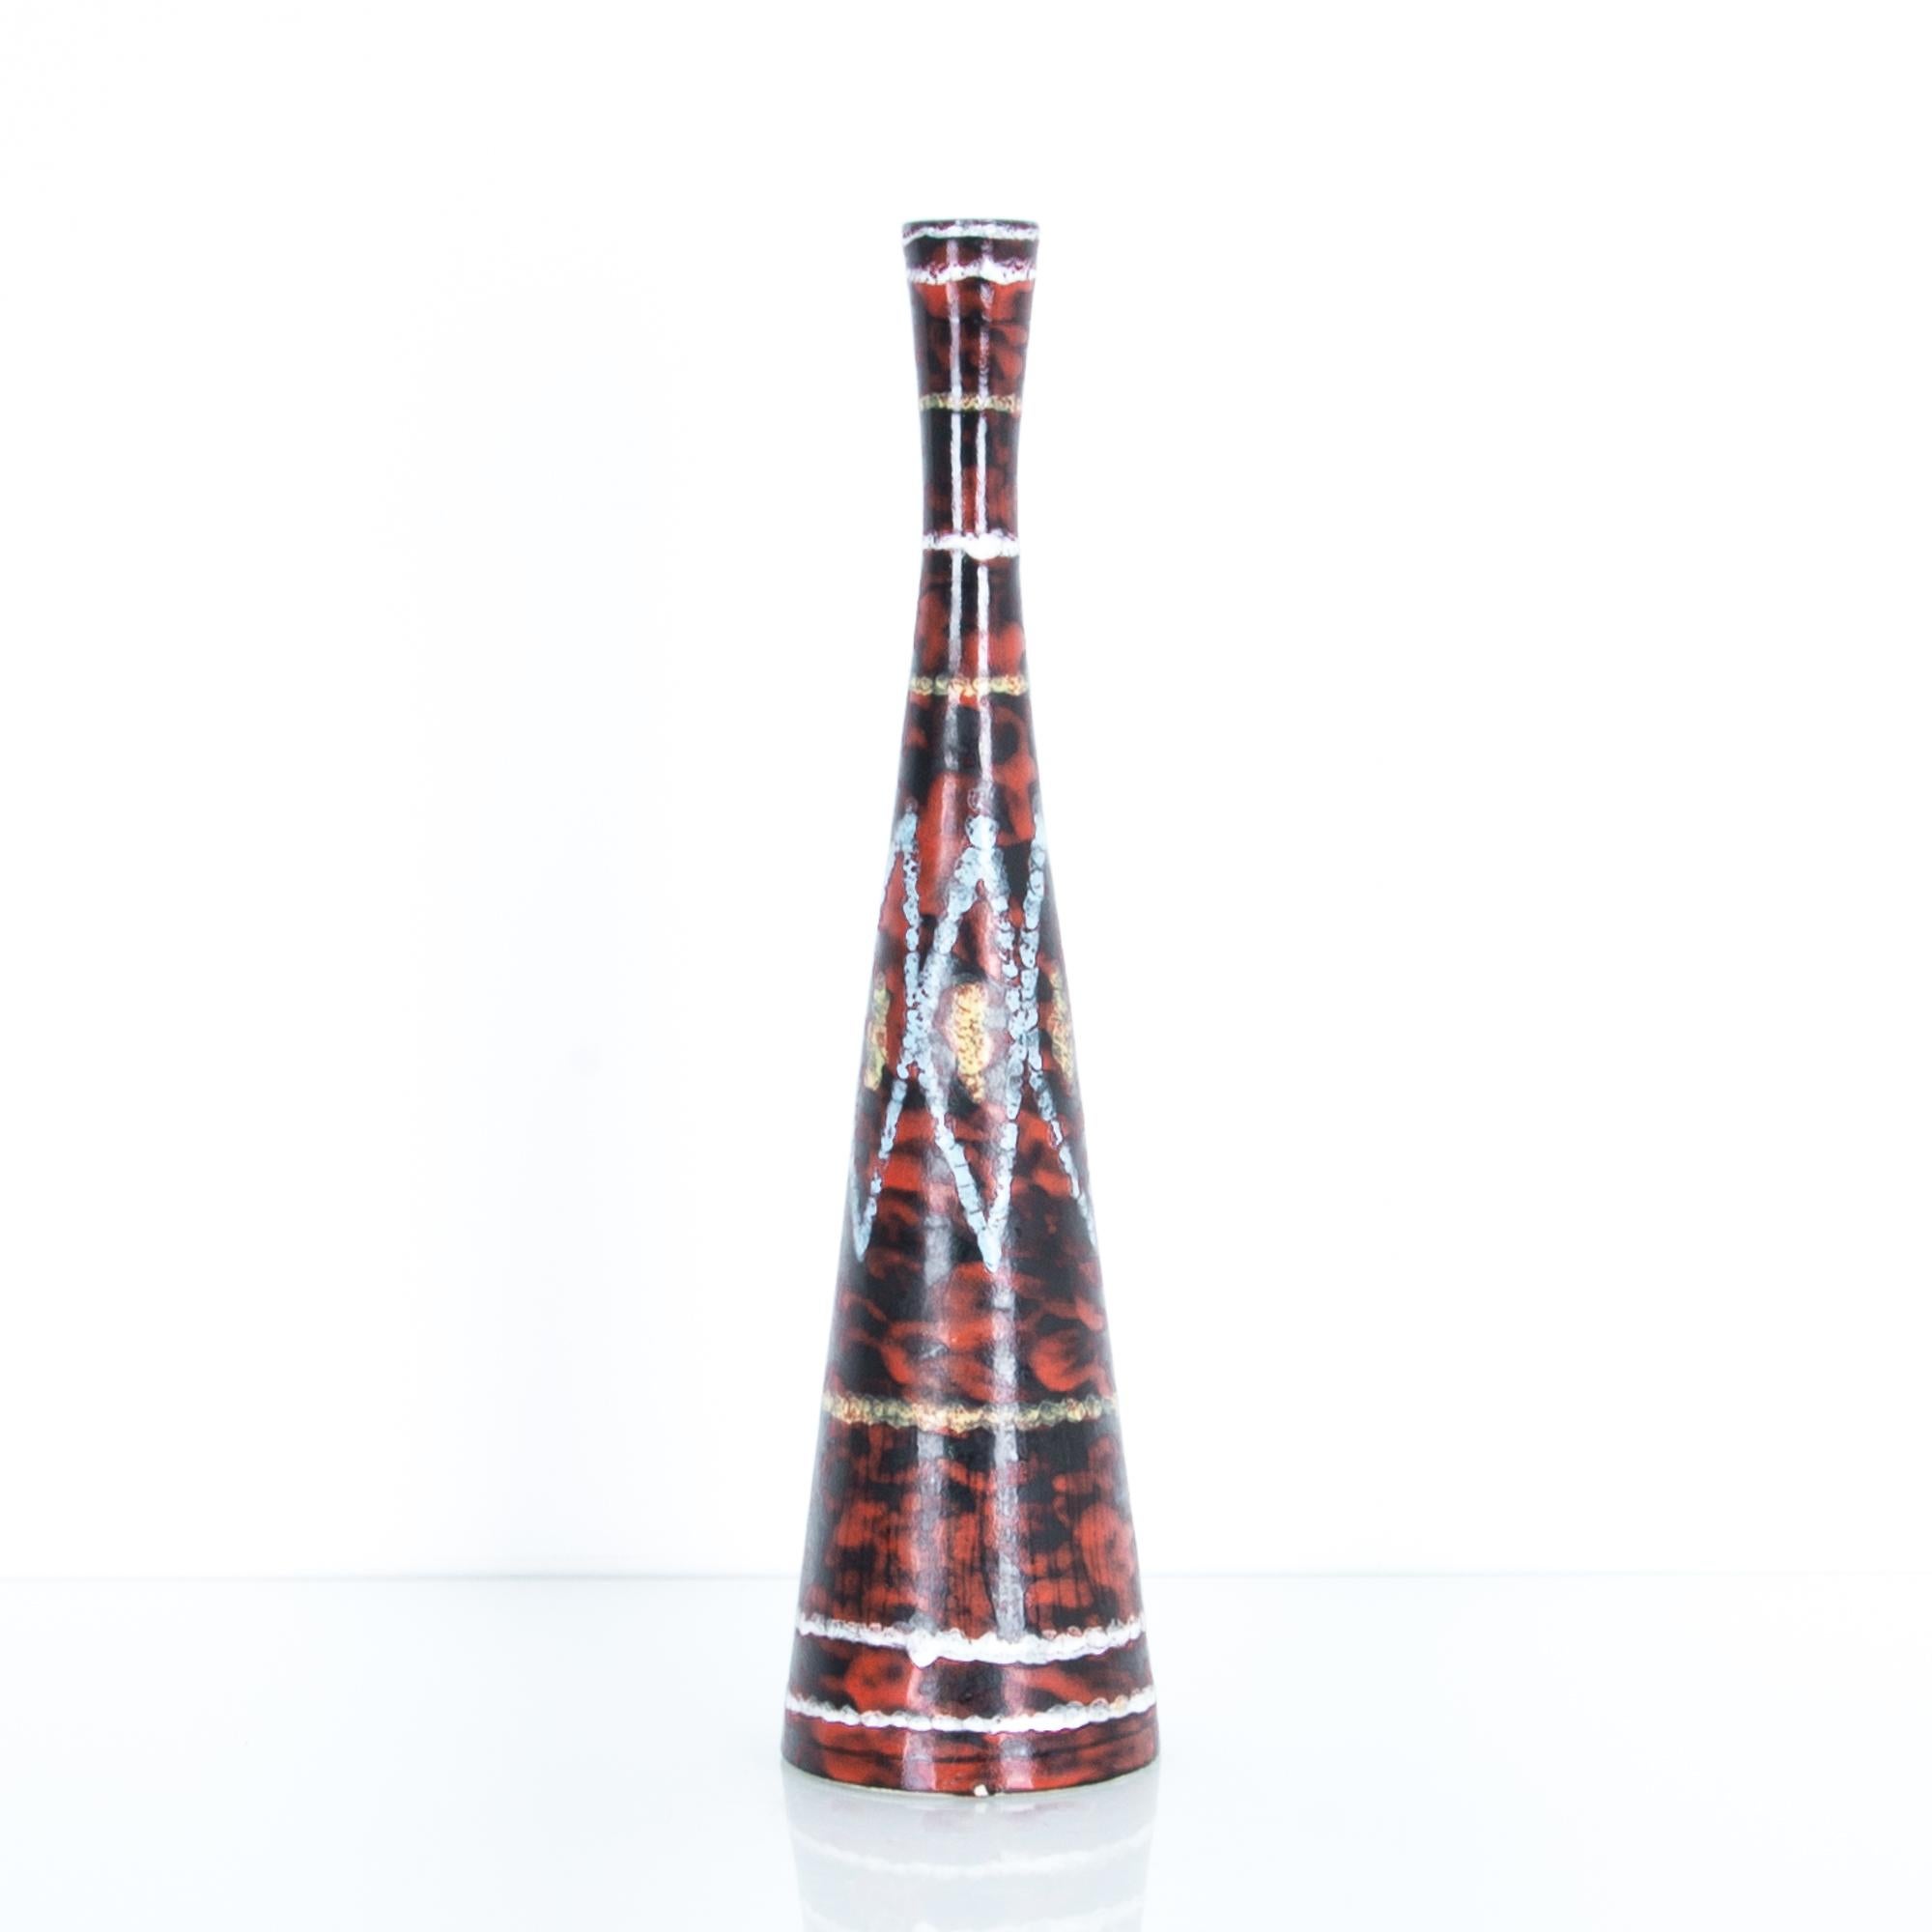 This midcentury ceramic vase comes from the republic of San Marino, a micro-state in the middle of Northern Italy. The distinct San Marino style of ceramics, which flourished in the 1950s and 1960s, is notable for modern shapes and contrast between